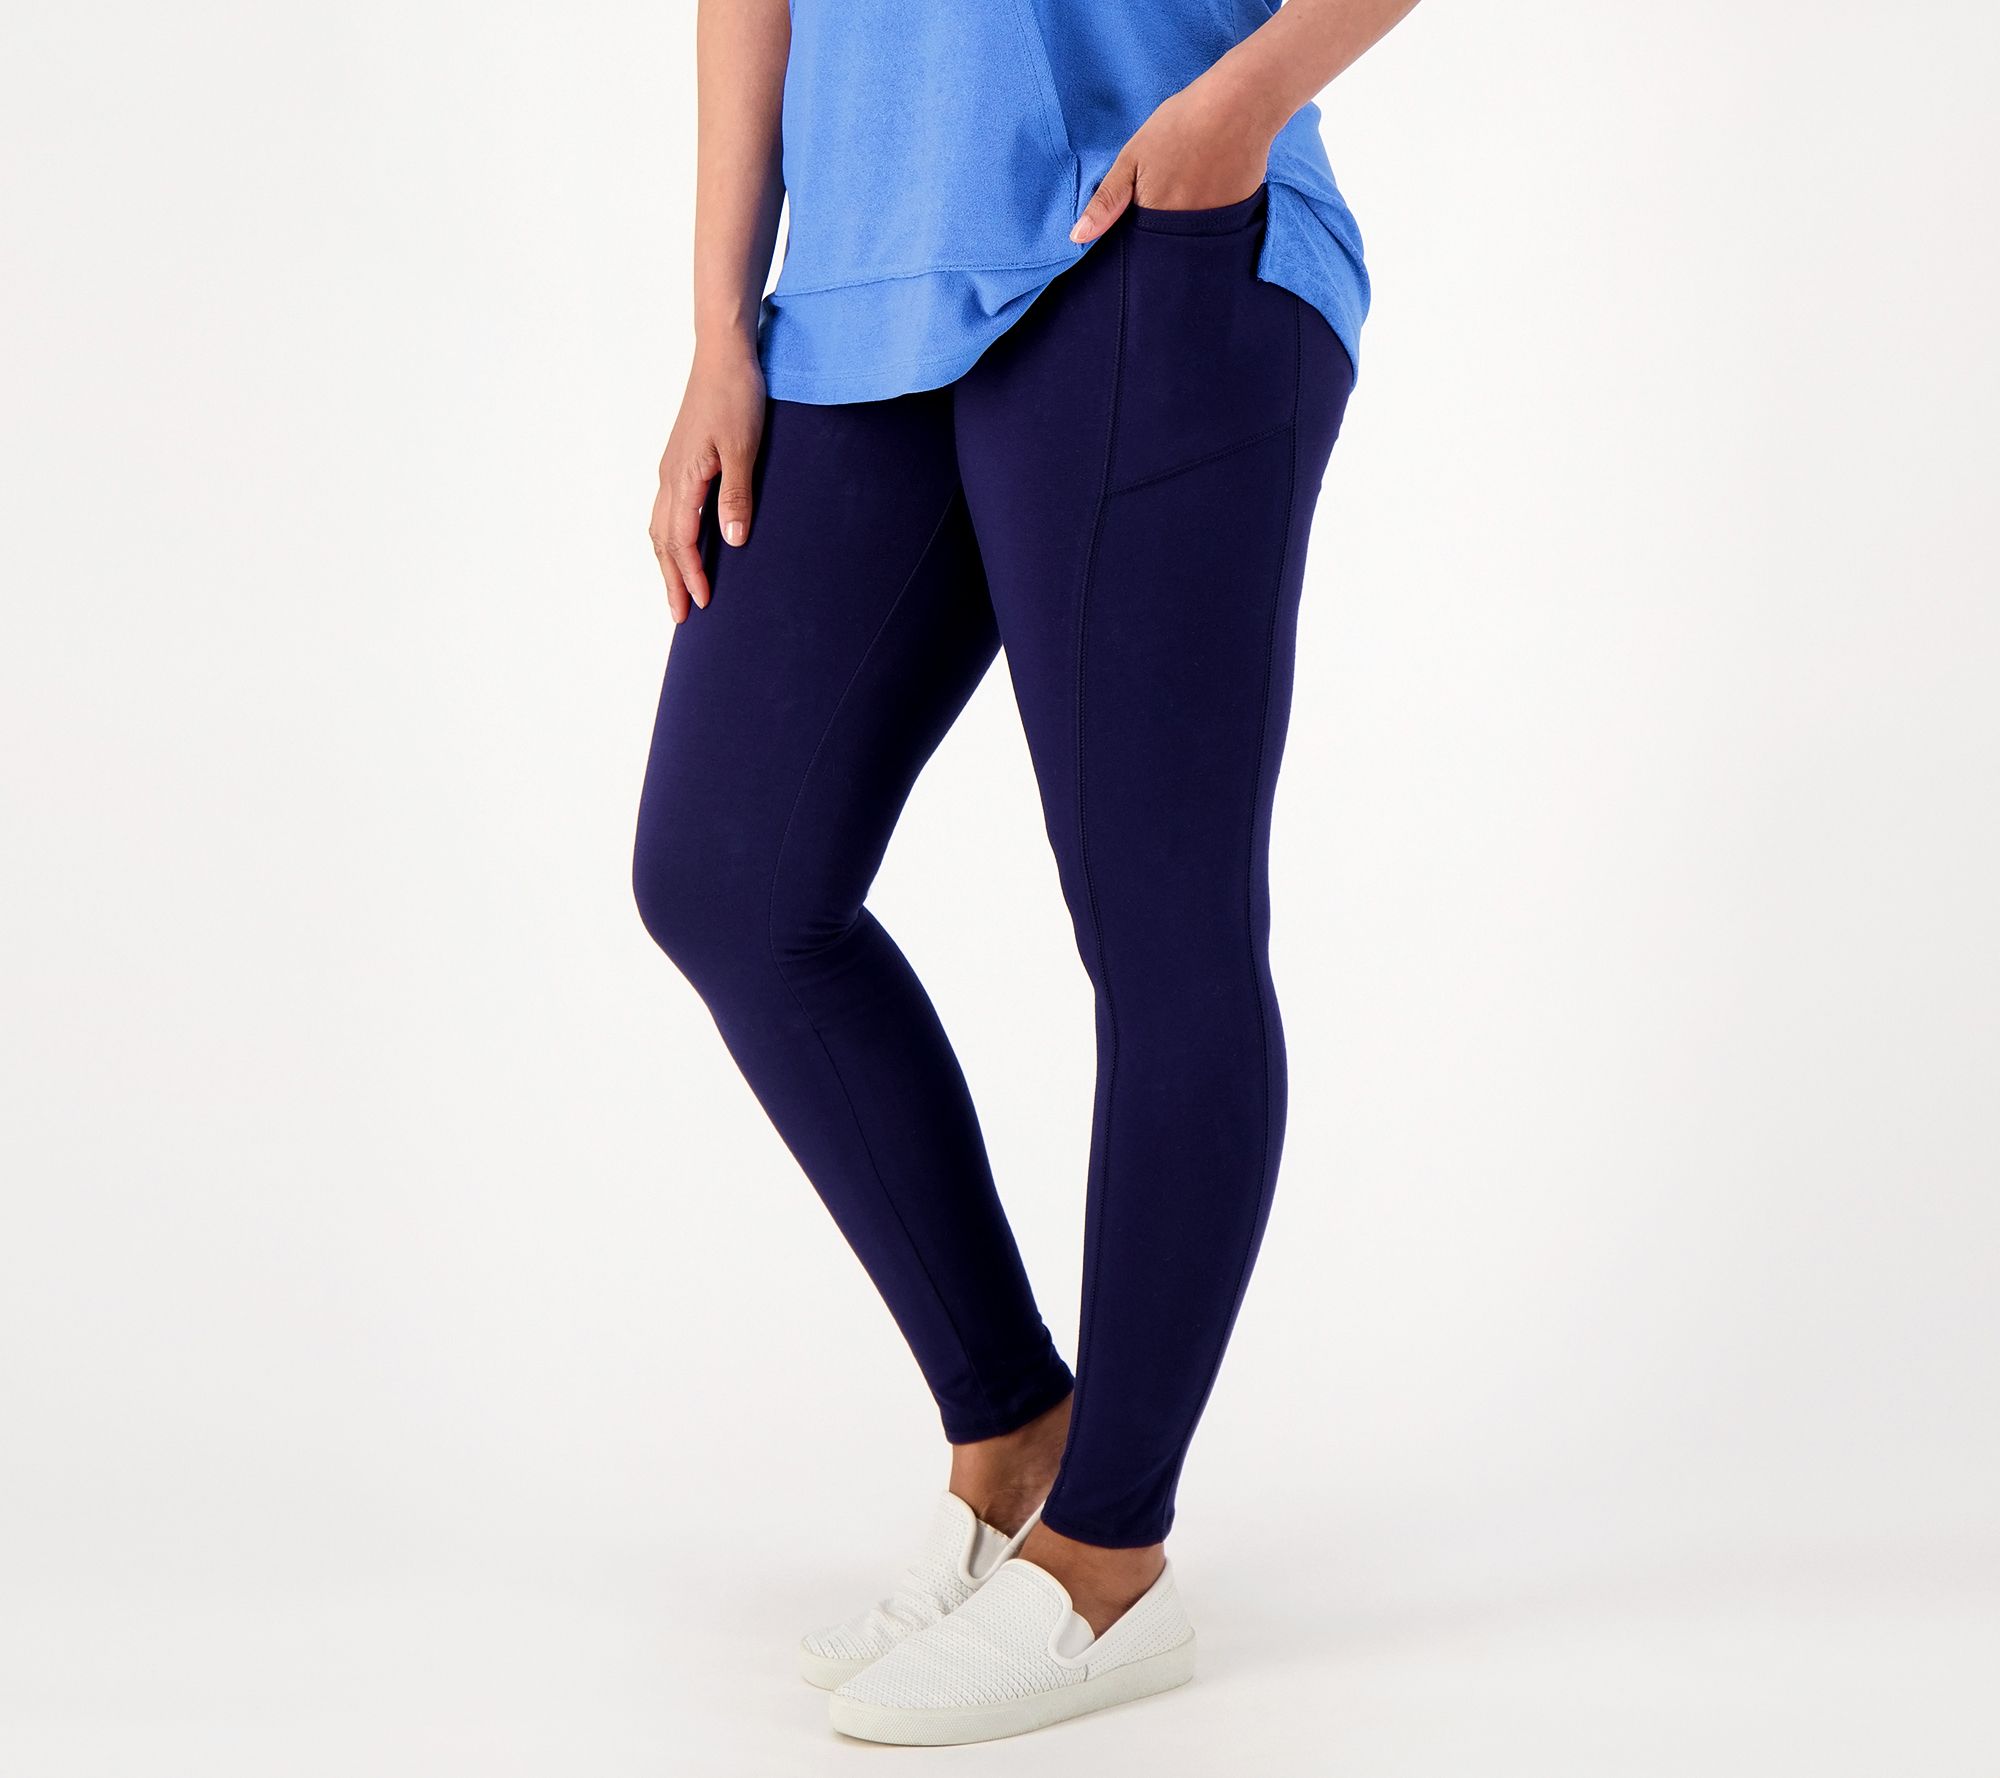 Denim & Co. Active Duo Stretch Leggings with Side Pocket 